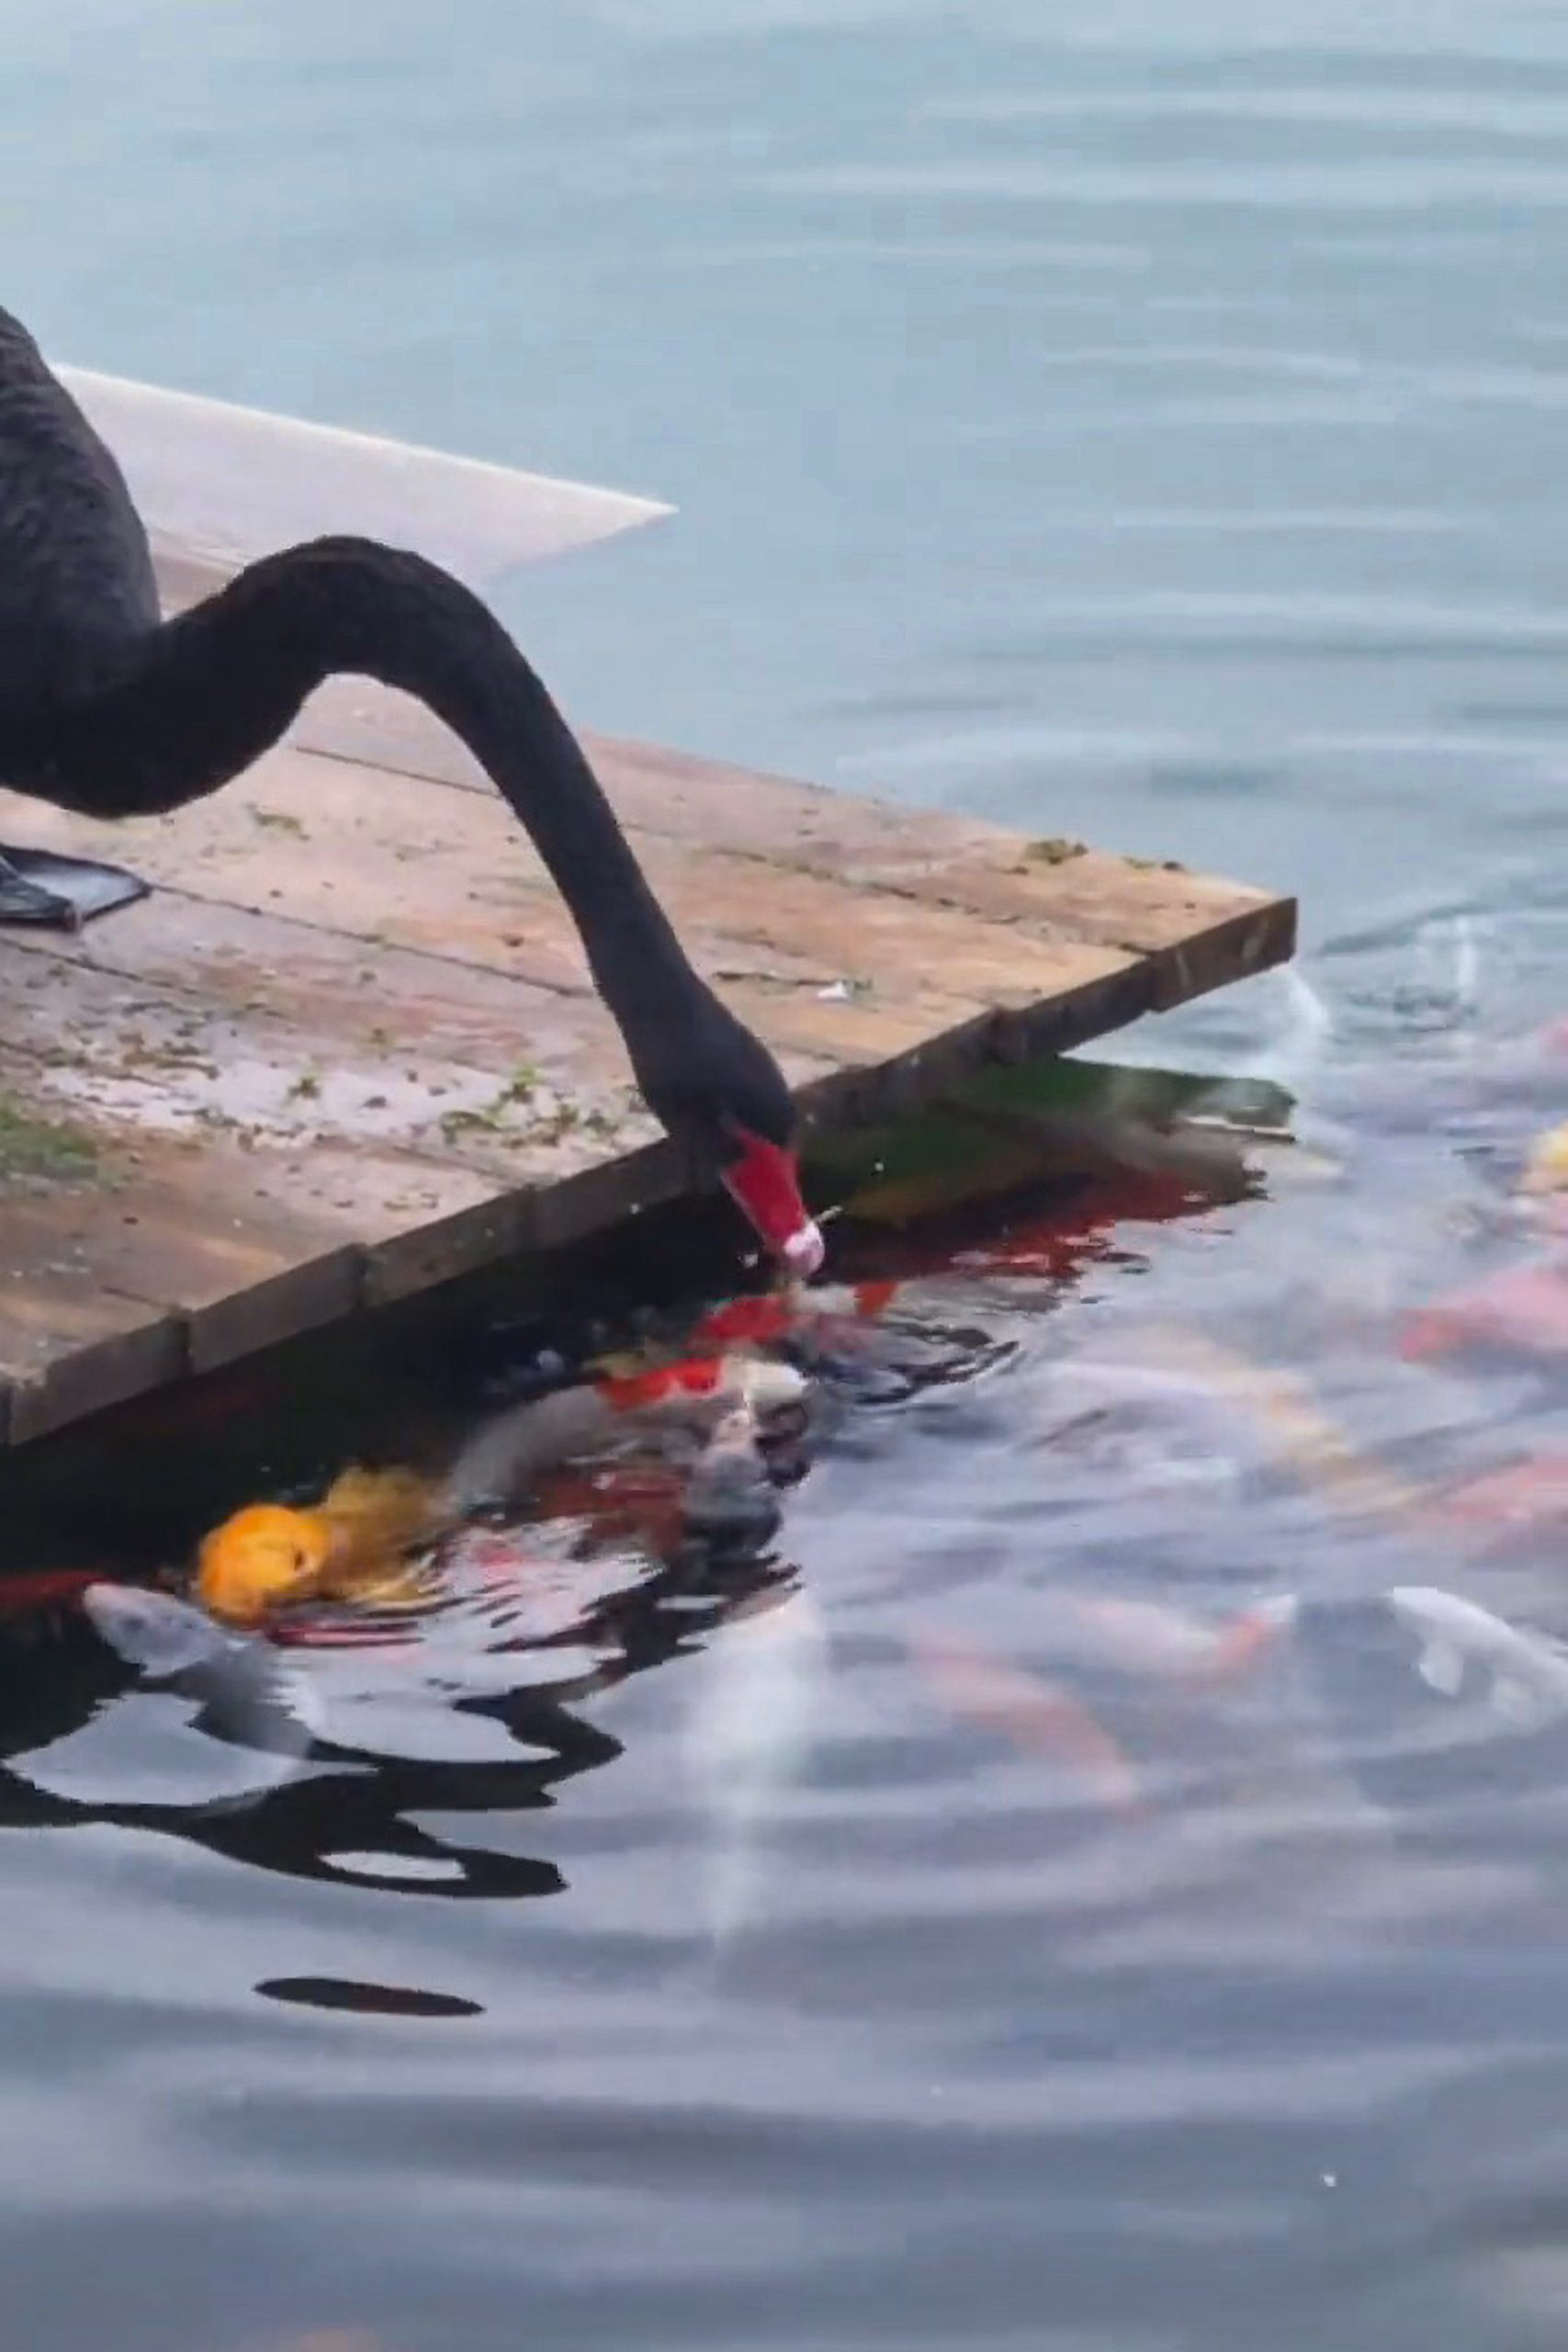 Read more about the article Cute Moment Black Swan Shares Its Food With Waiting Fish